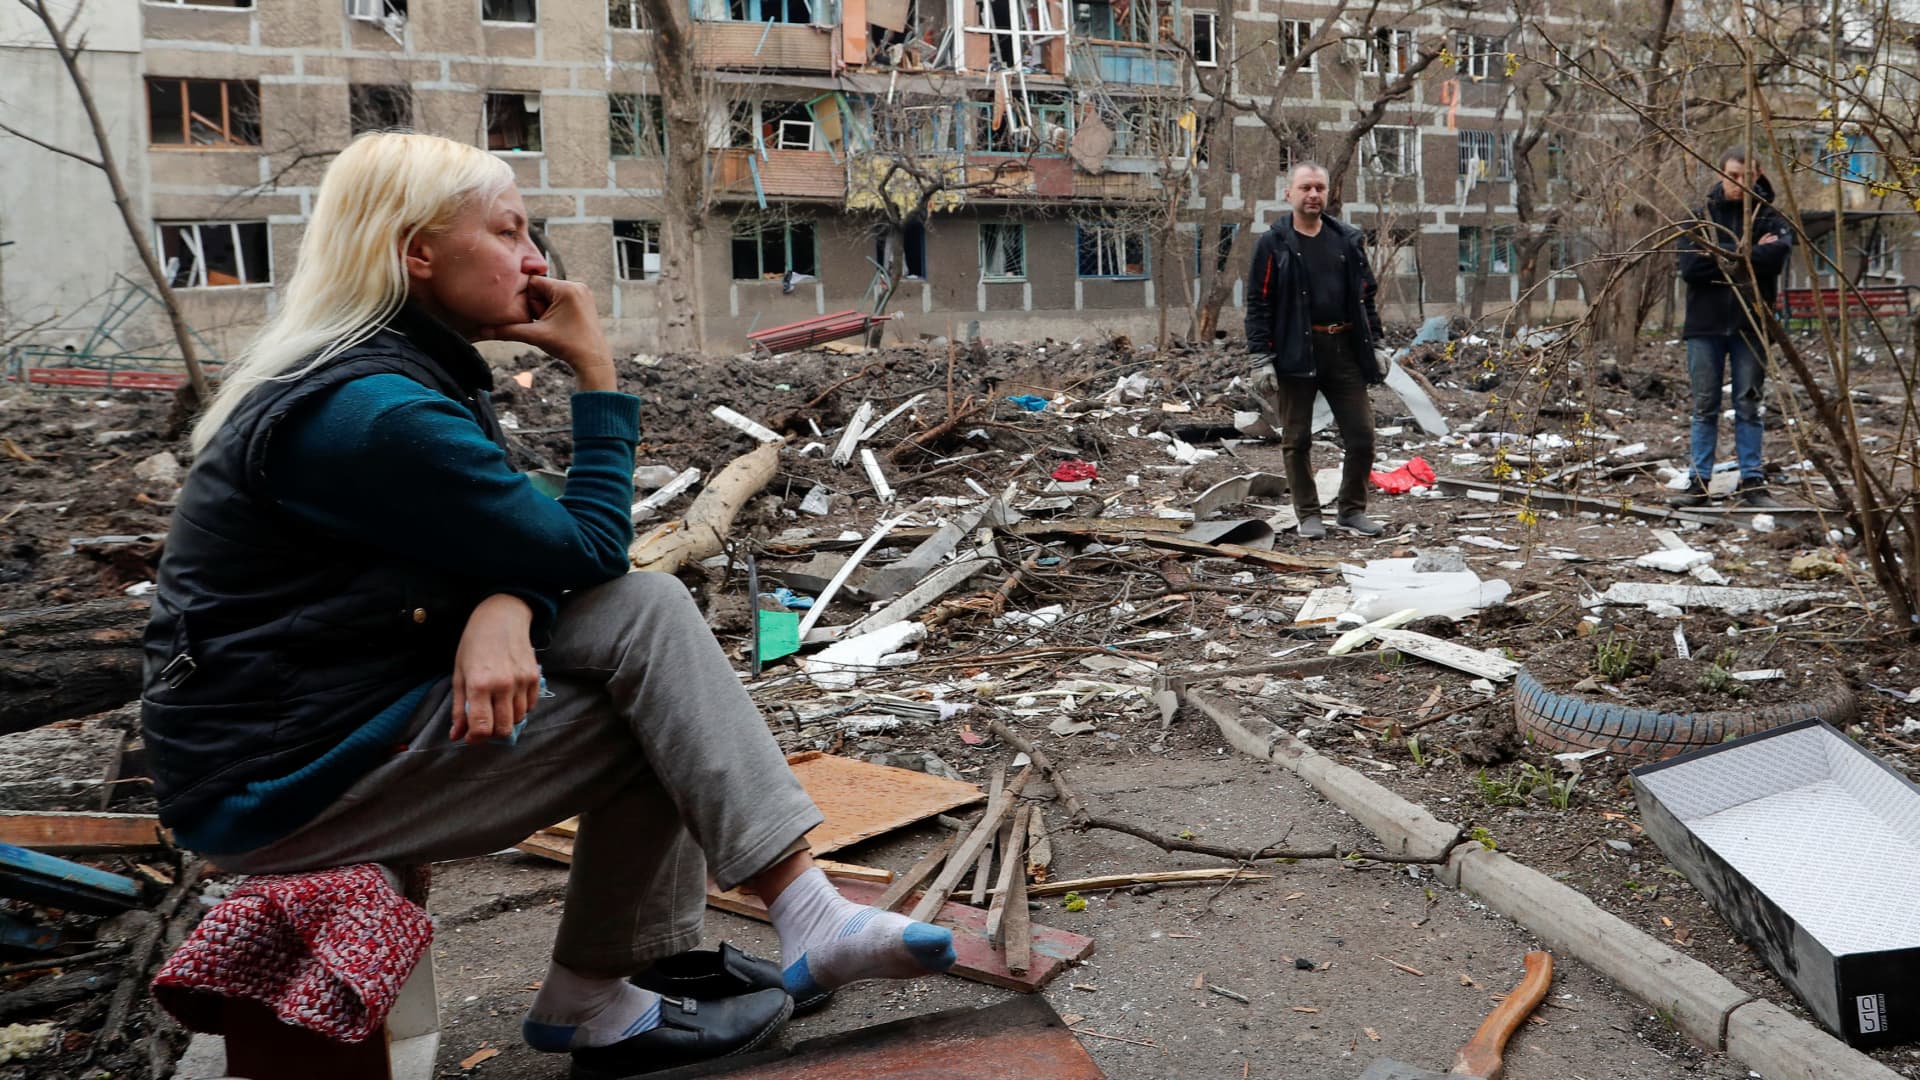 Local resident gather in a courtyard near a block of flats heavily damaged during Ukraine-Russia conflict in the southern port city of Mariupol, Ukraine April 18, 2022.